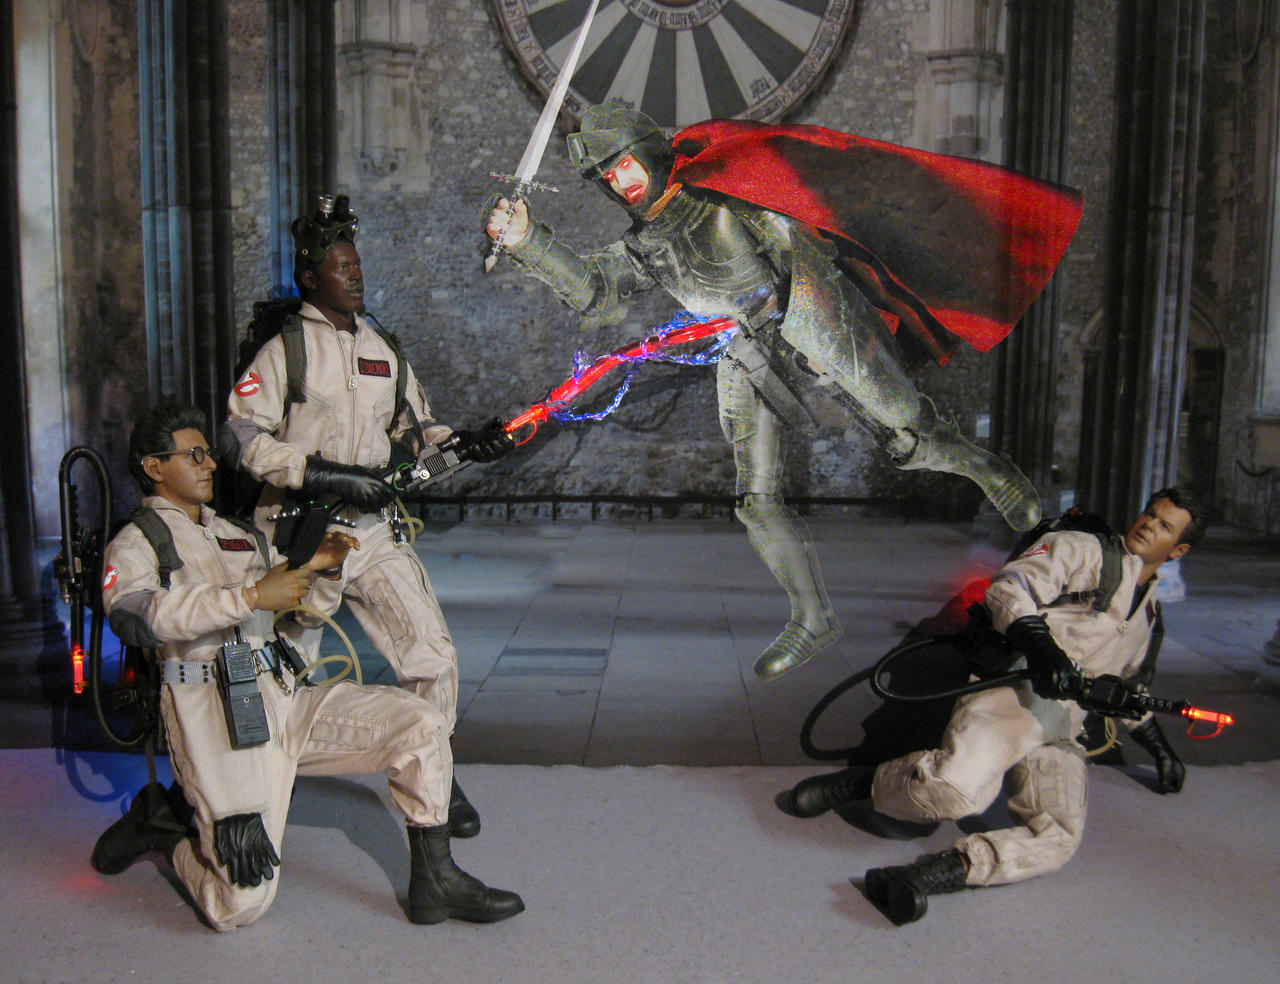 ghostbusters_knights_in_translucent_armor_by_thedollknight-dc2j9f9.jpg